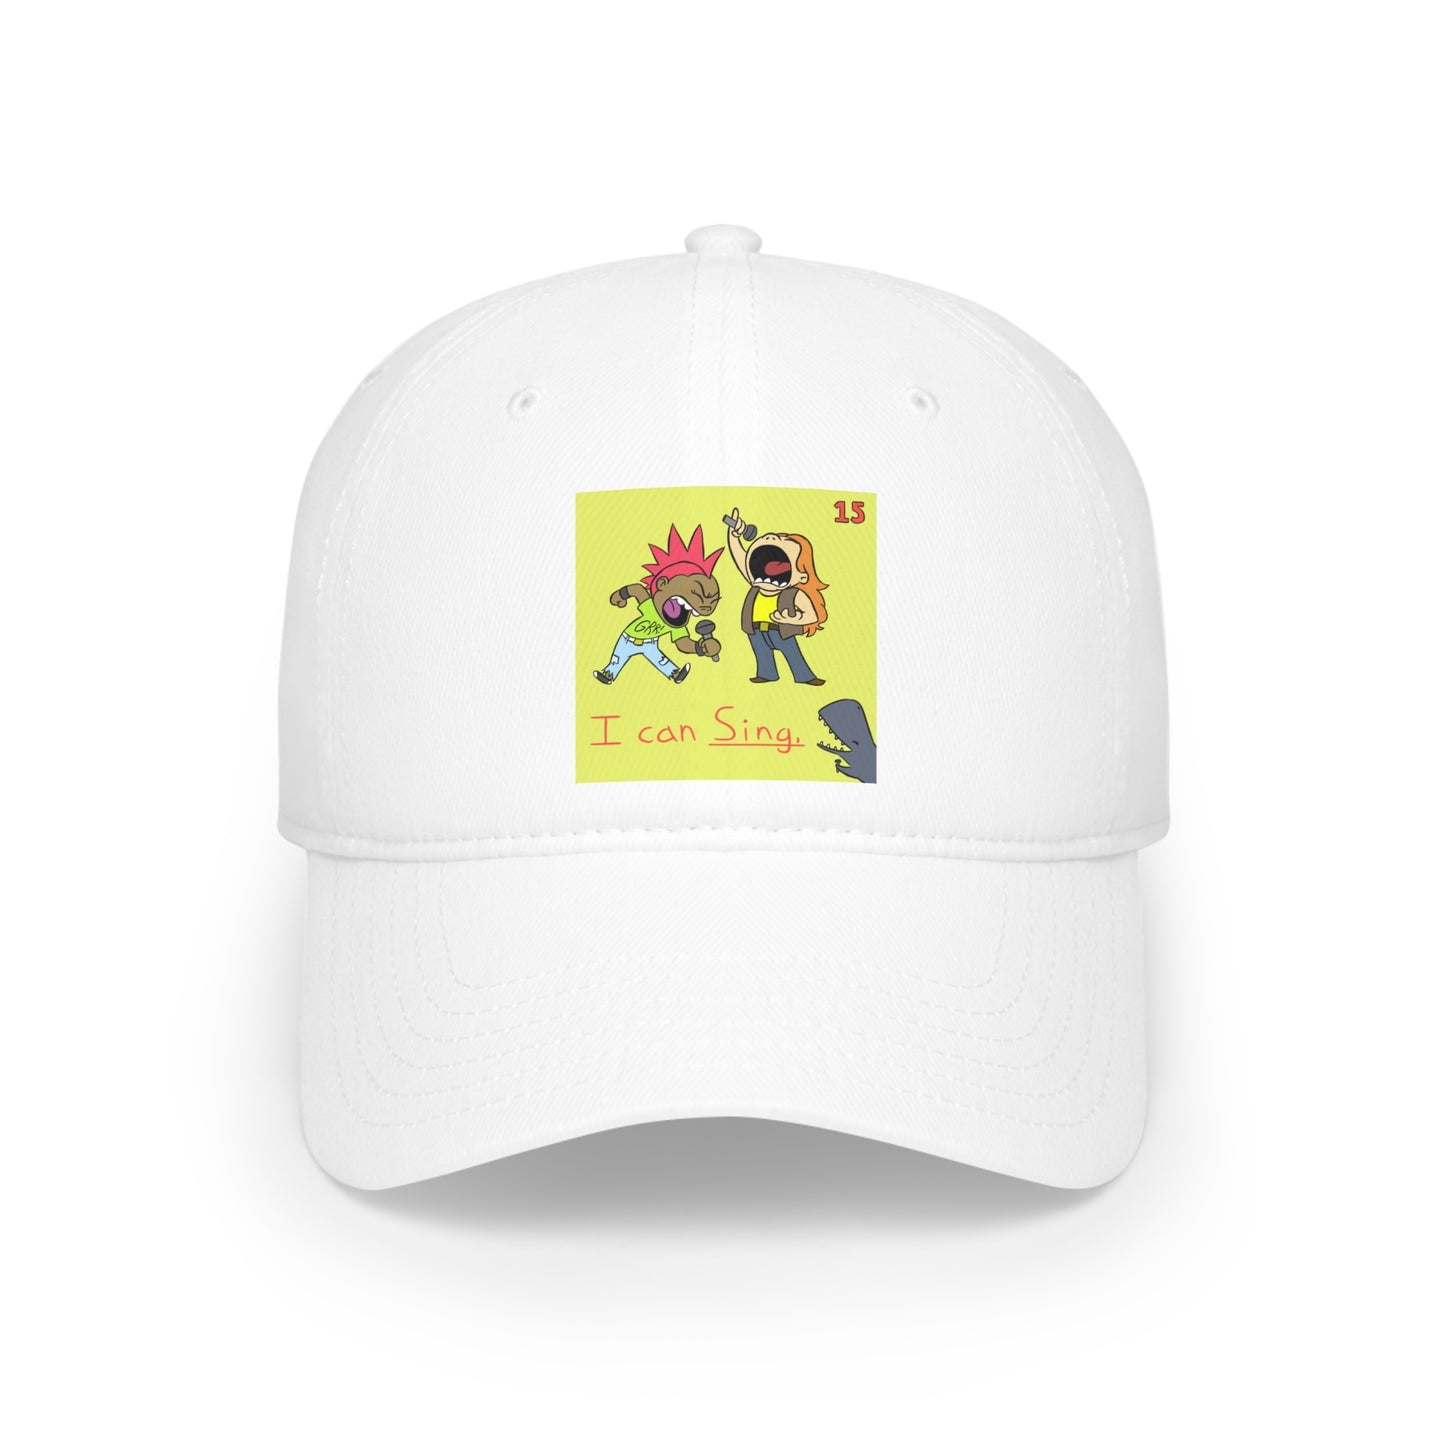 ITBOM SING BOSS Low Profile Baseball Cap -  Whale Song